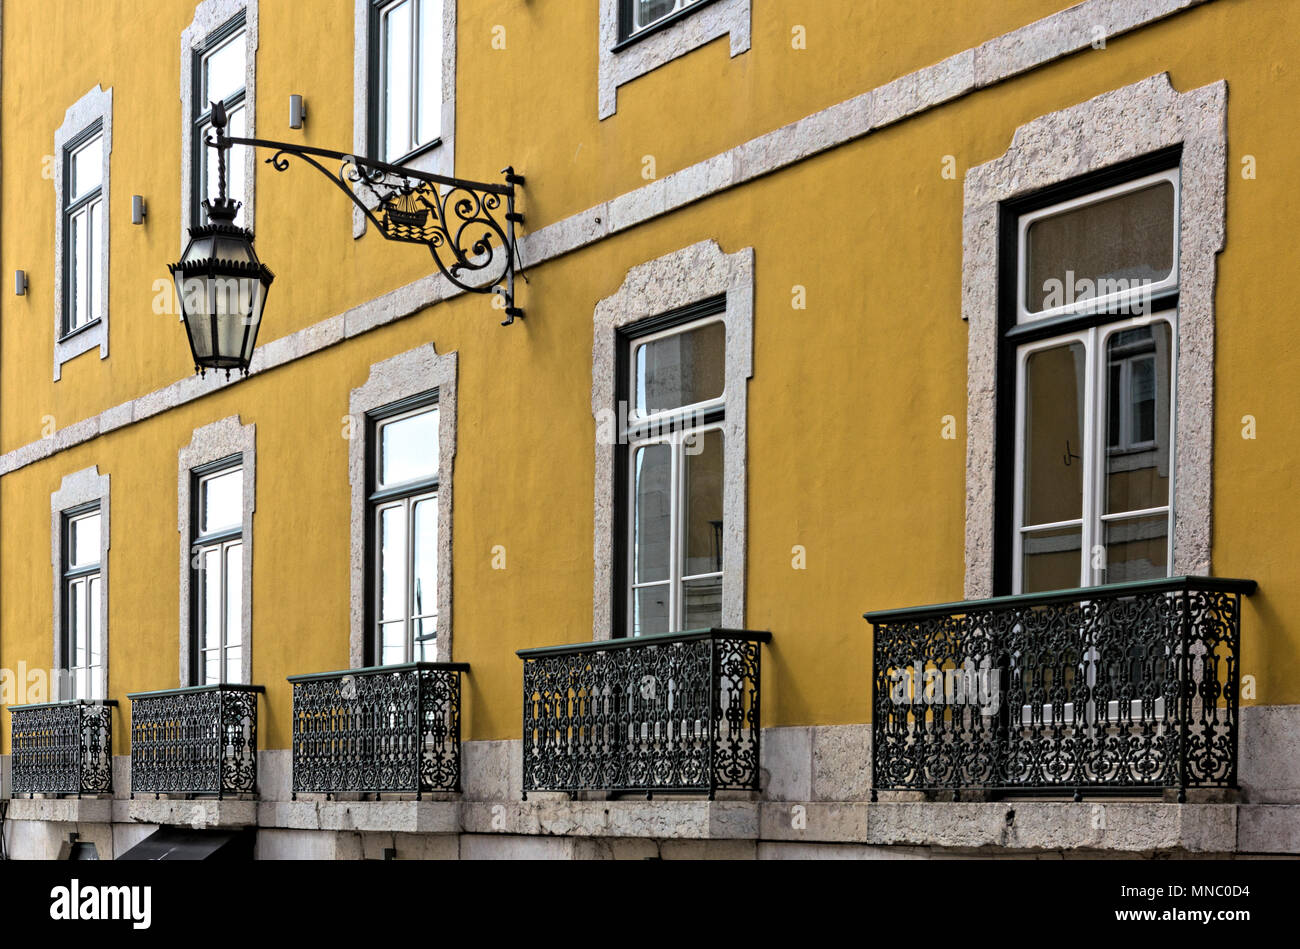 View along ochre coloured wall with ornate ornamental balconies, French windows and a wall-mounted street lamp Stock Photo